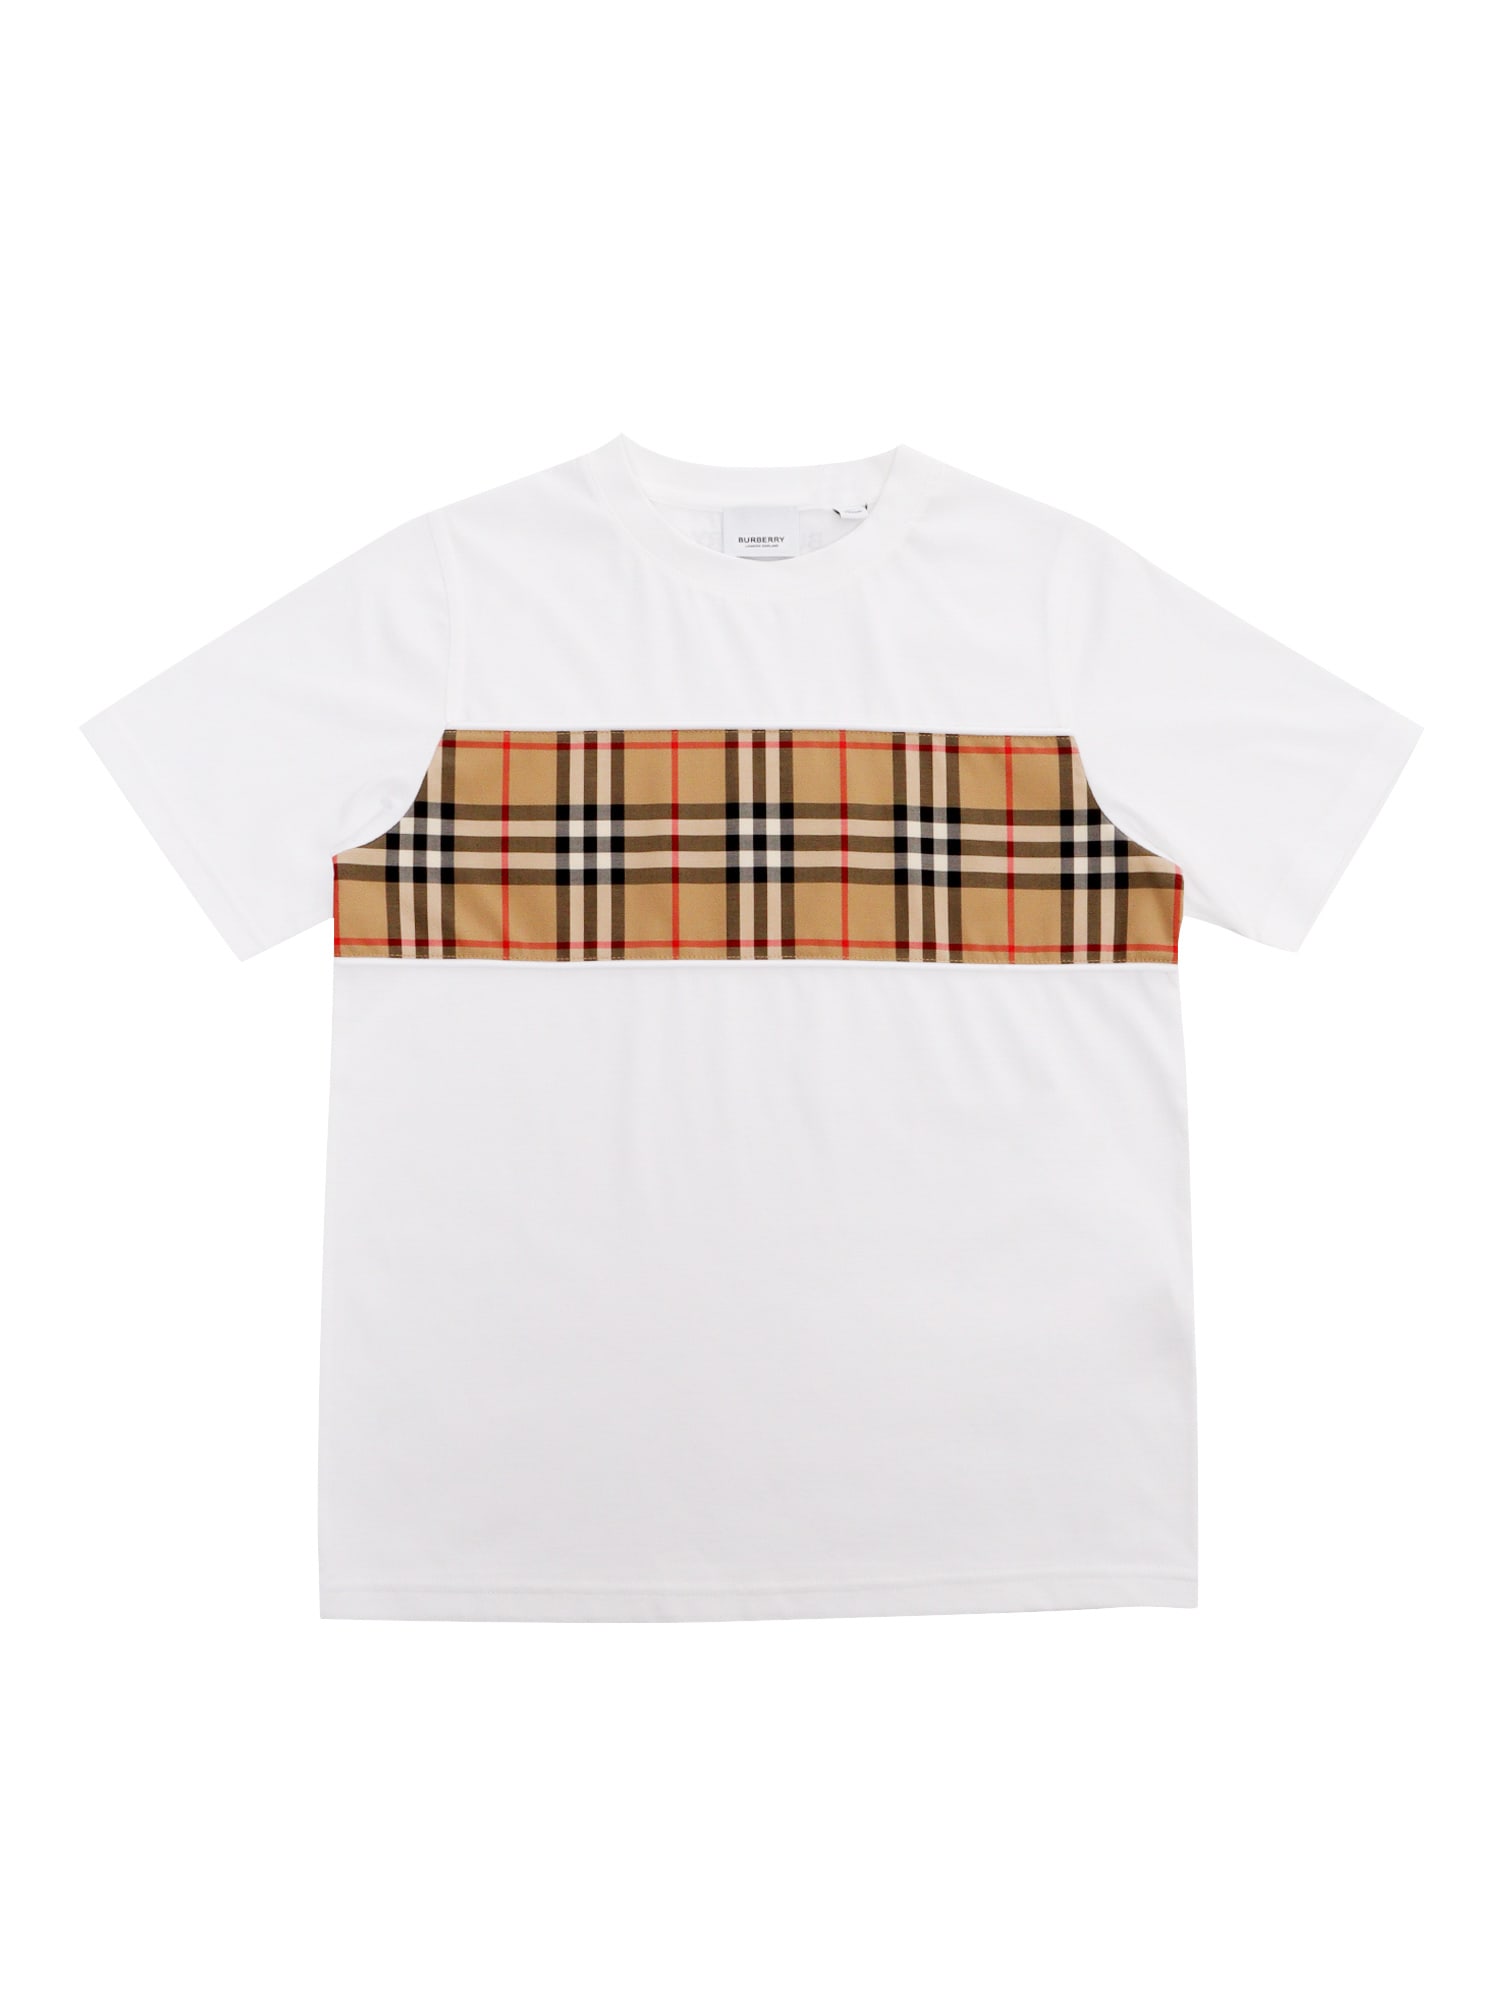 Shop Burberry White T-short With Print